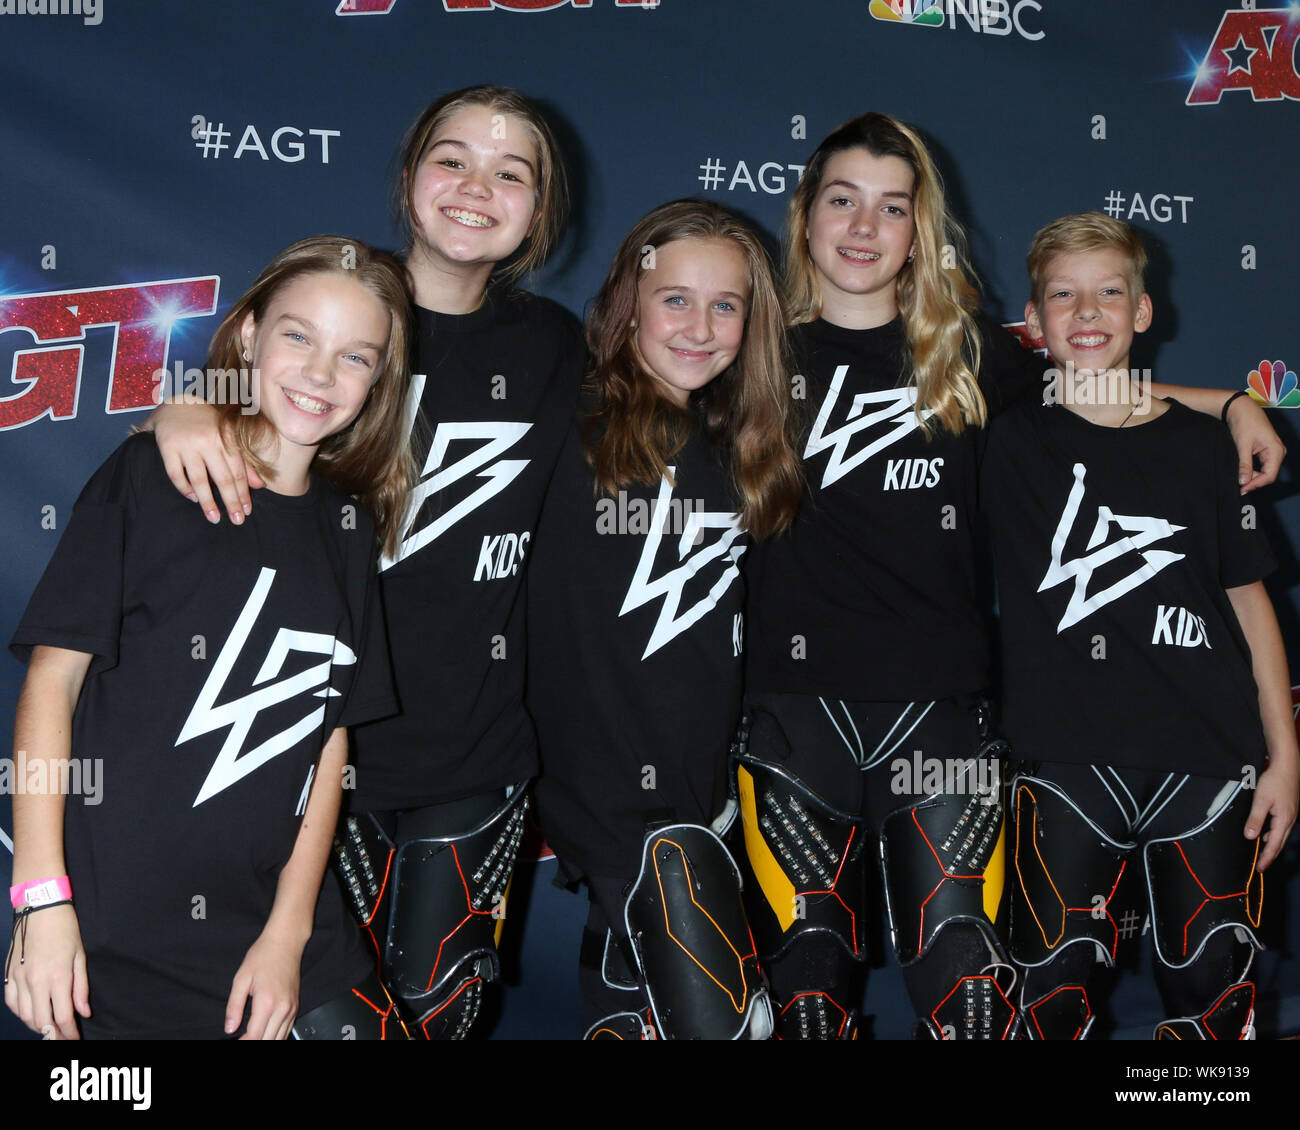 LOS ANGELES - SEP 3: Light Balance Kids at the Got Talent" Season 14 Live Show Red Carpet at Dolby Theater on September 3, 2019 in Los Angeles, CA Stock Photo - Alamy